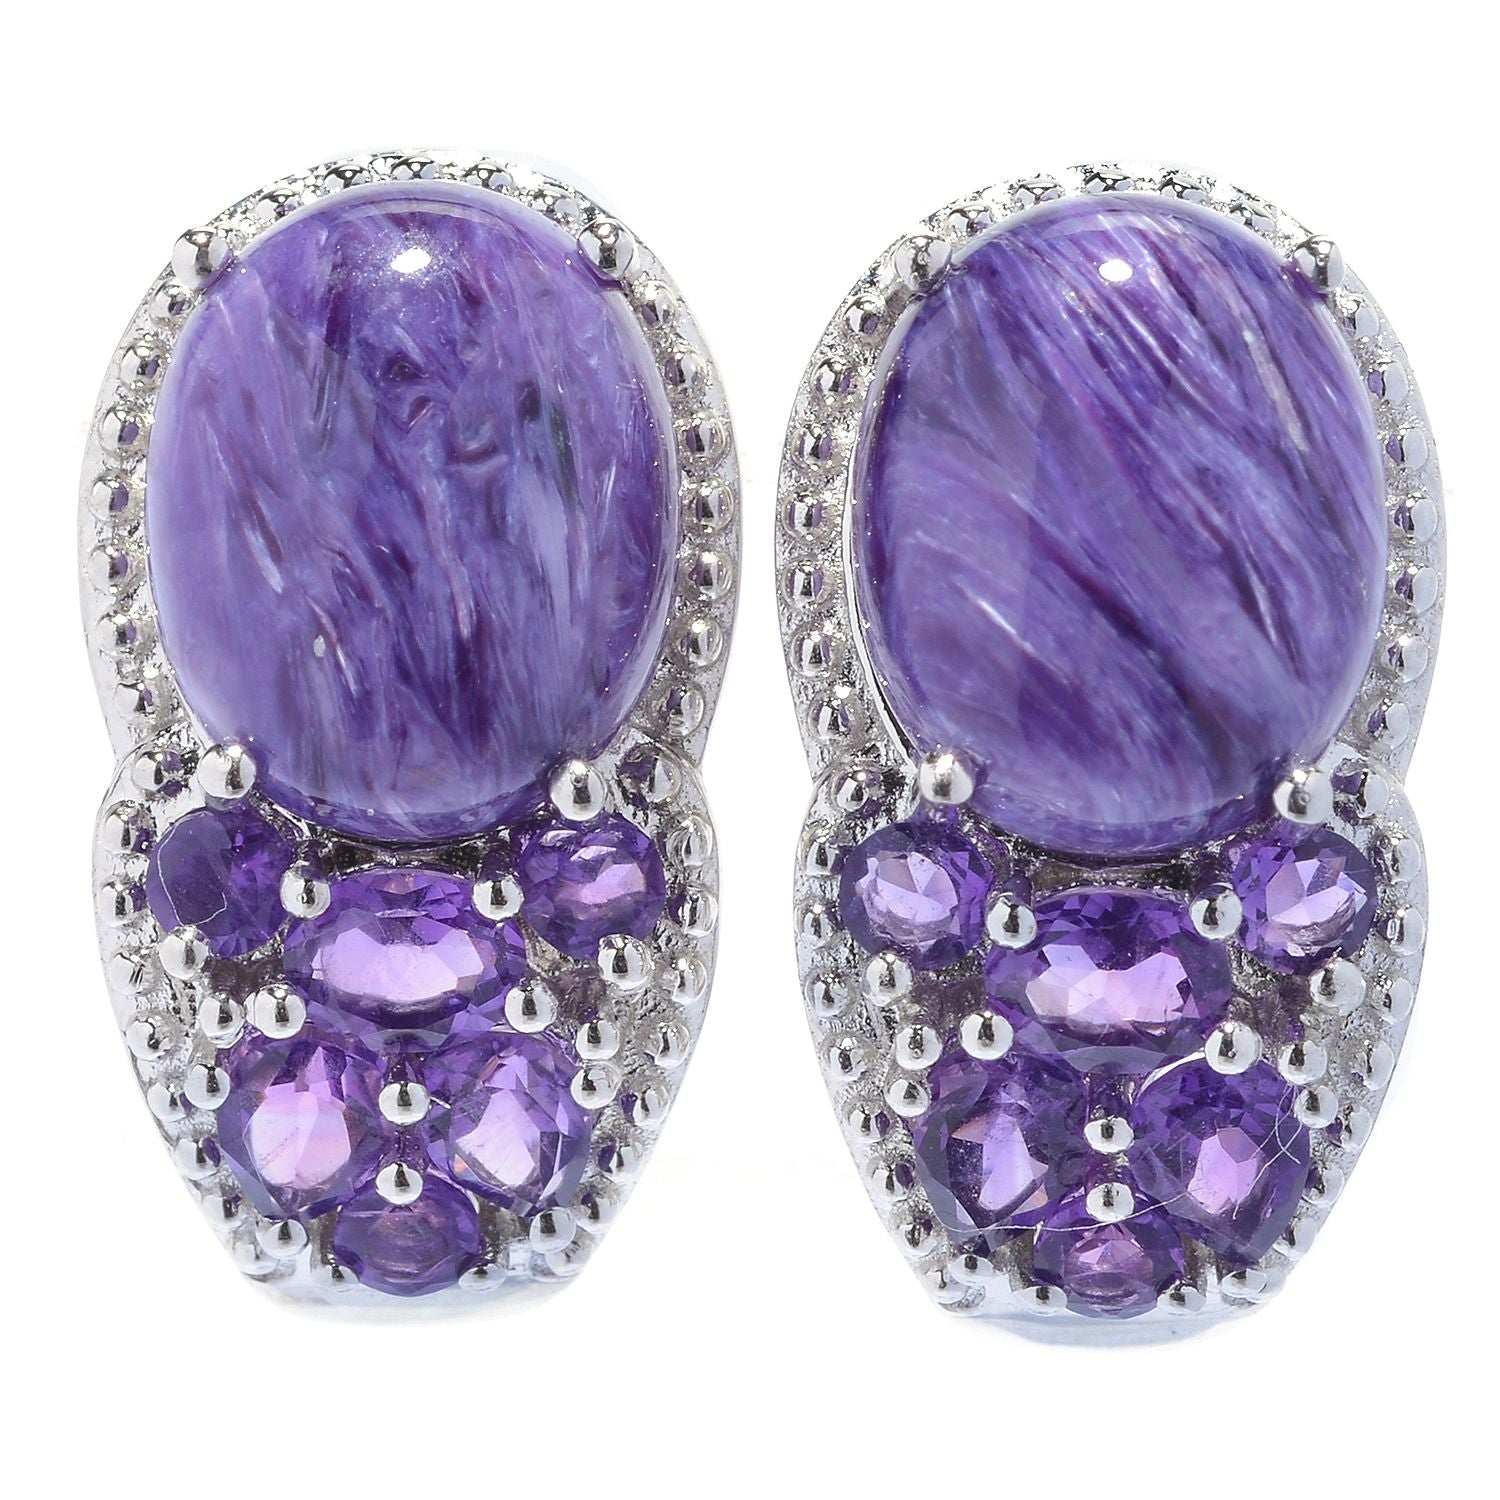 Pinctore Sterling Silver Oval Cabochon Chatroite and Amethyst J-Hoop Earrings